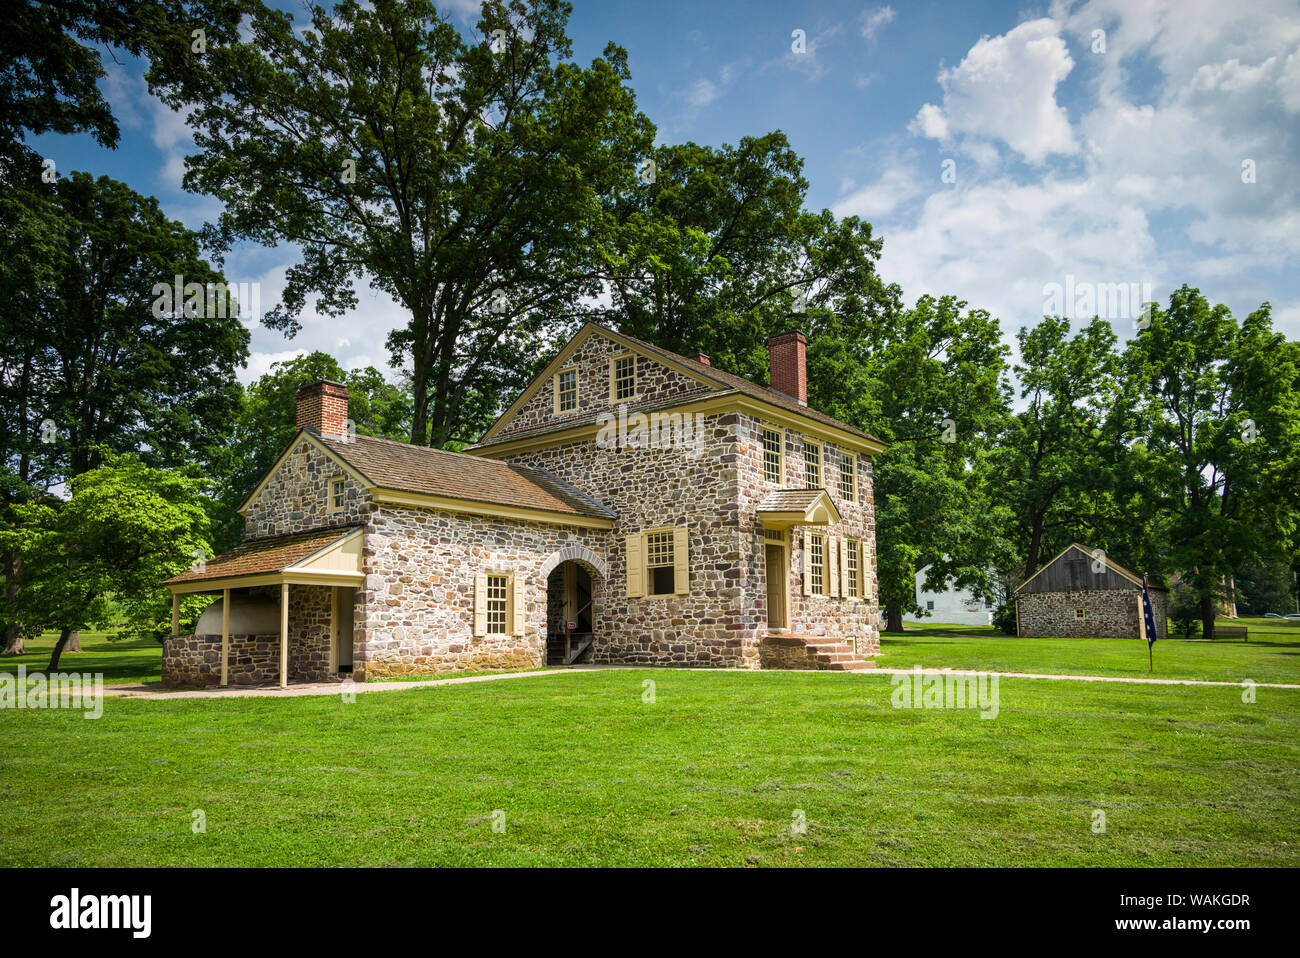 USA, Pennsylvania, King of Prussia. Valley Forge National Historical Park, battlefield of the American Revolutionary War, General George Washington's headquarters Stock Photo